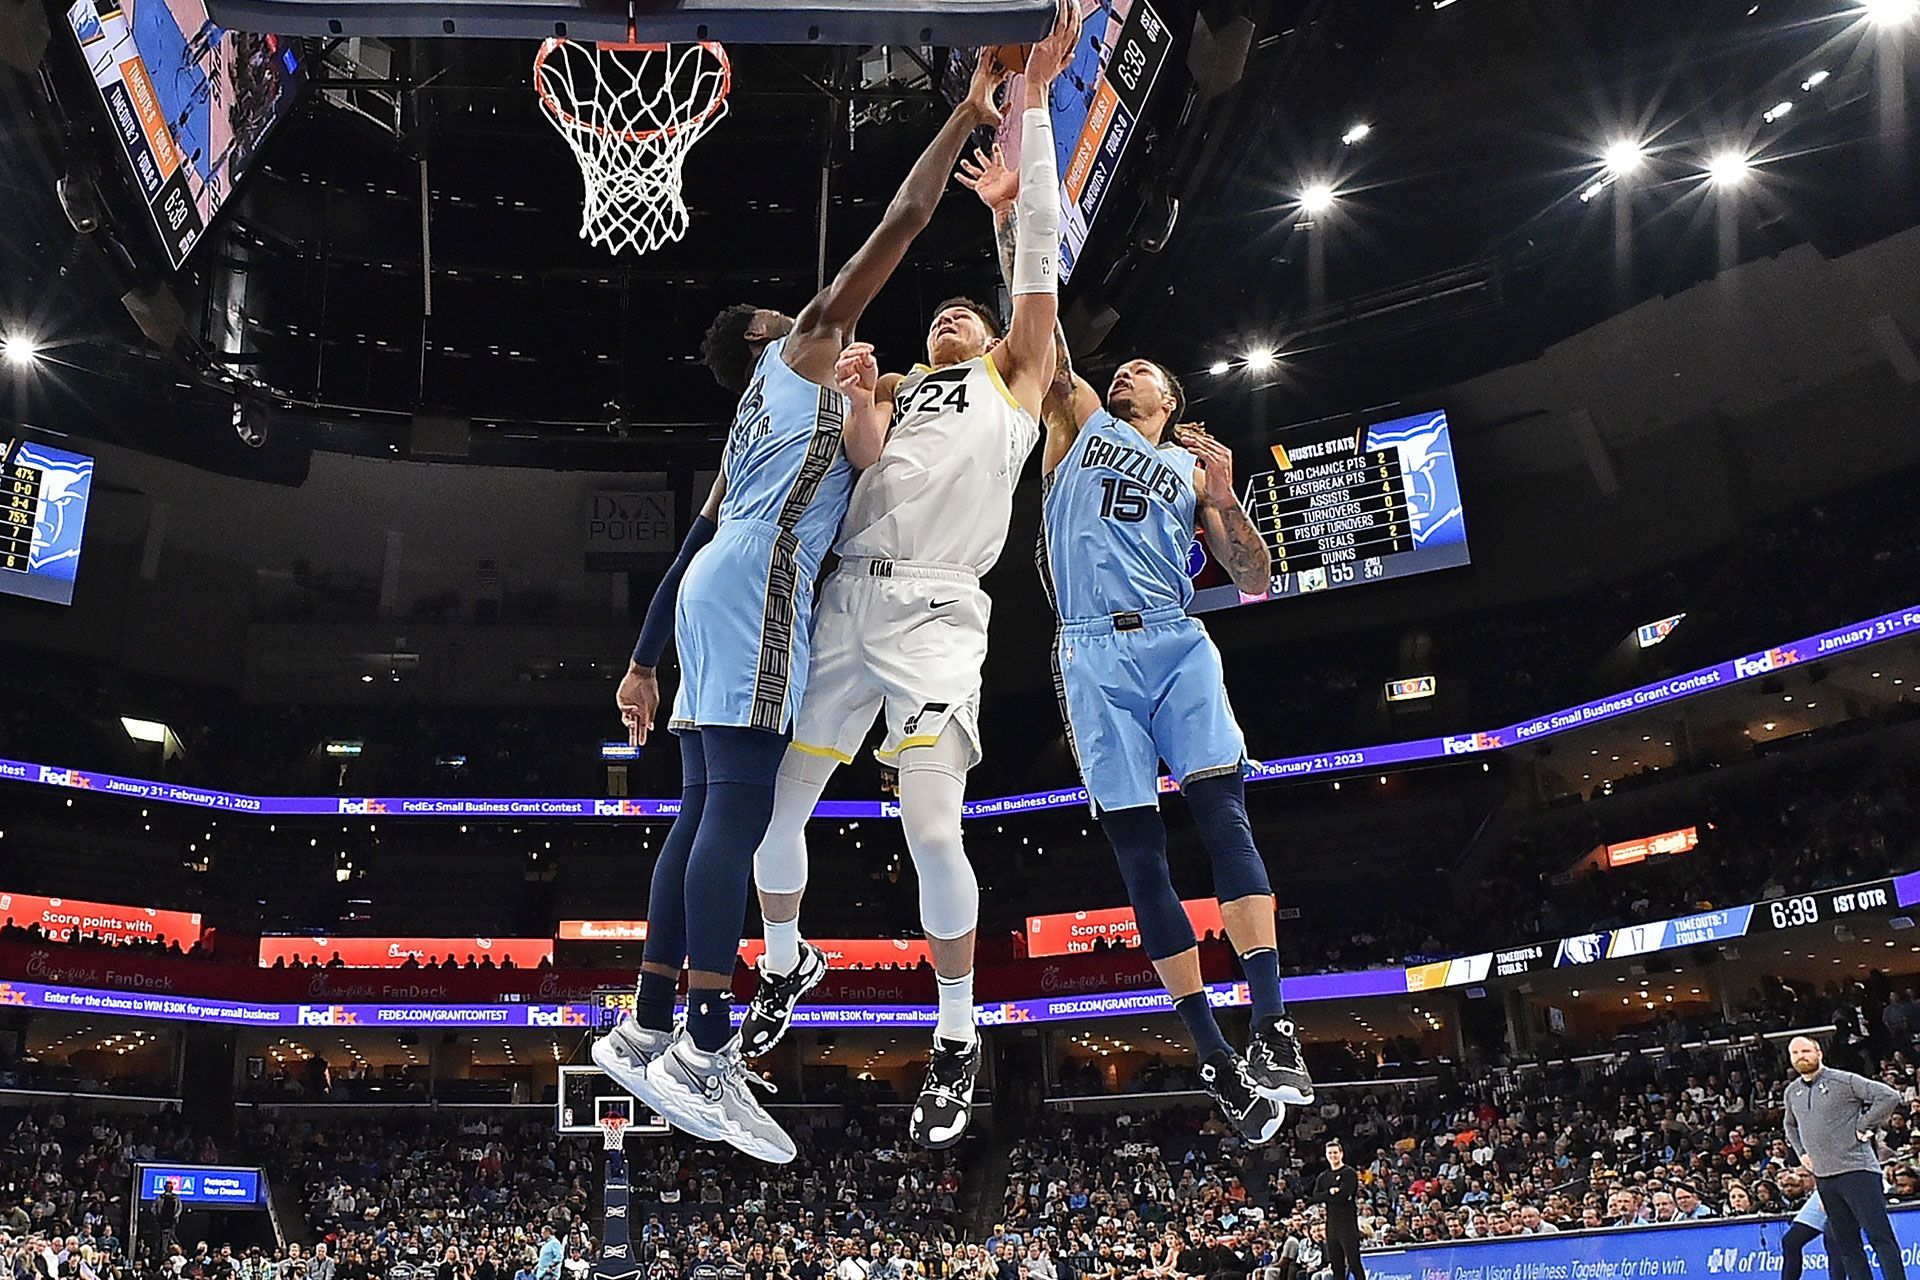 MEMPHIS, TENNESSEE - FEBRUARY 15: Jaren Jackson Jr. #13 and Brandon Clarke #15 of the Memphis Grizzlies challenge the shot of Walker Kessler #24 of the Utah Jazz during the game at FedExForum on February 15, 2023 in Memphis, Tennessee.